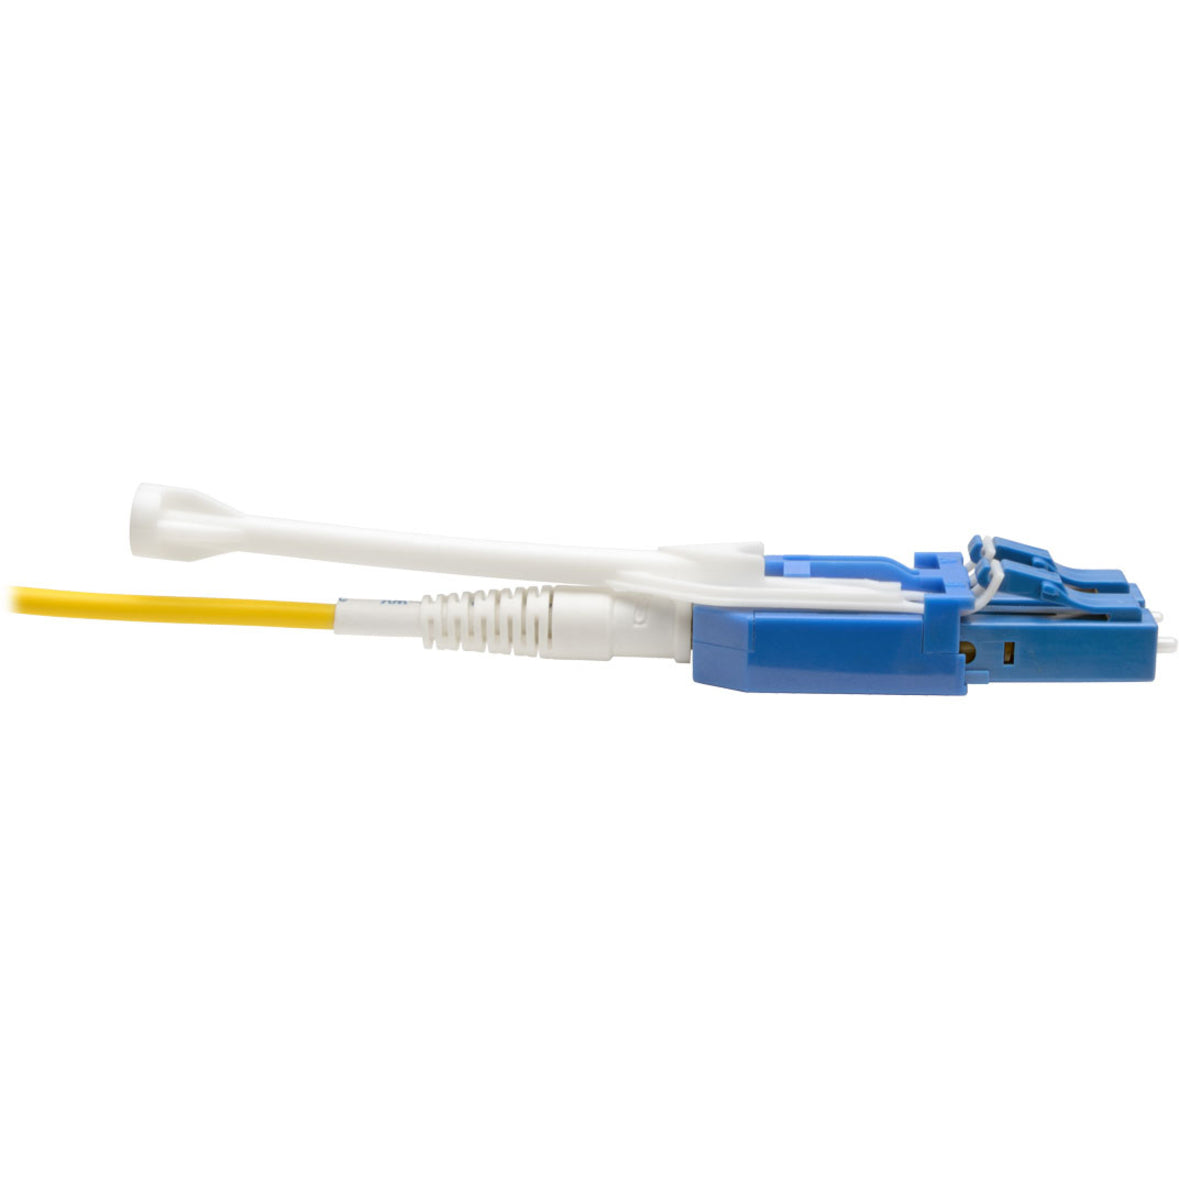 Tripp Lite N390-01M-8LC-AP MTP/MPO to 8xLC Singlemode Breakout Patch Cable, Yellow, 1m, Angled Connector, Uniboot Connector, 100 Gbit/s